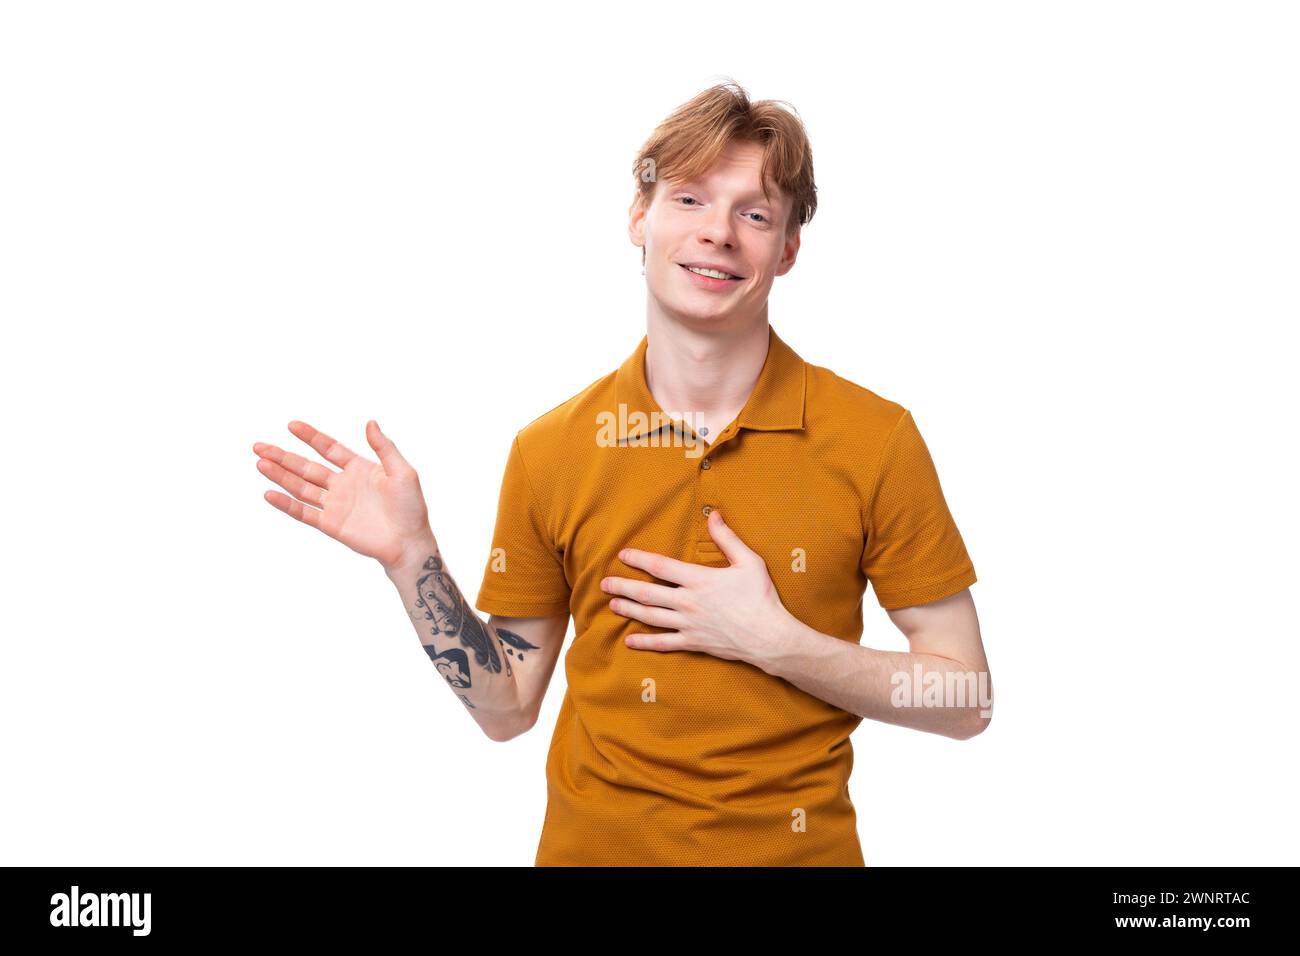 young man with red hair in orange t-shirt shows stop gesture Stock Photo